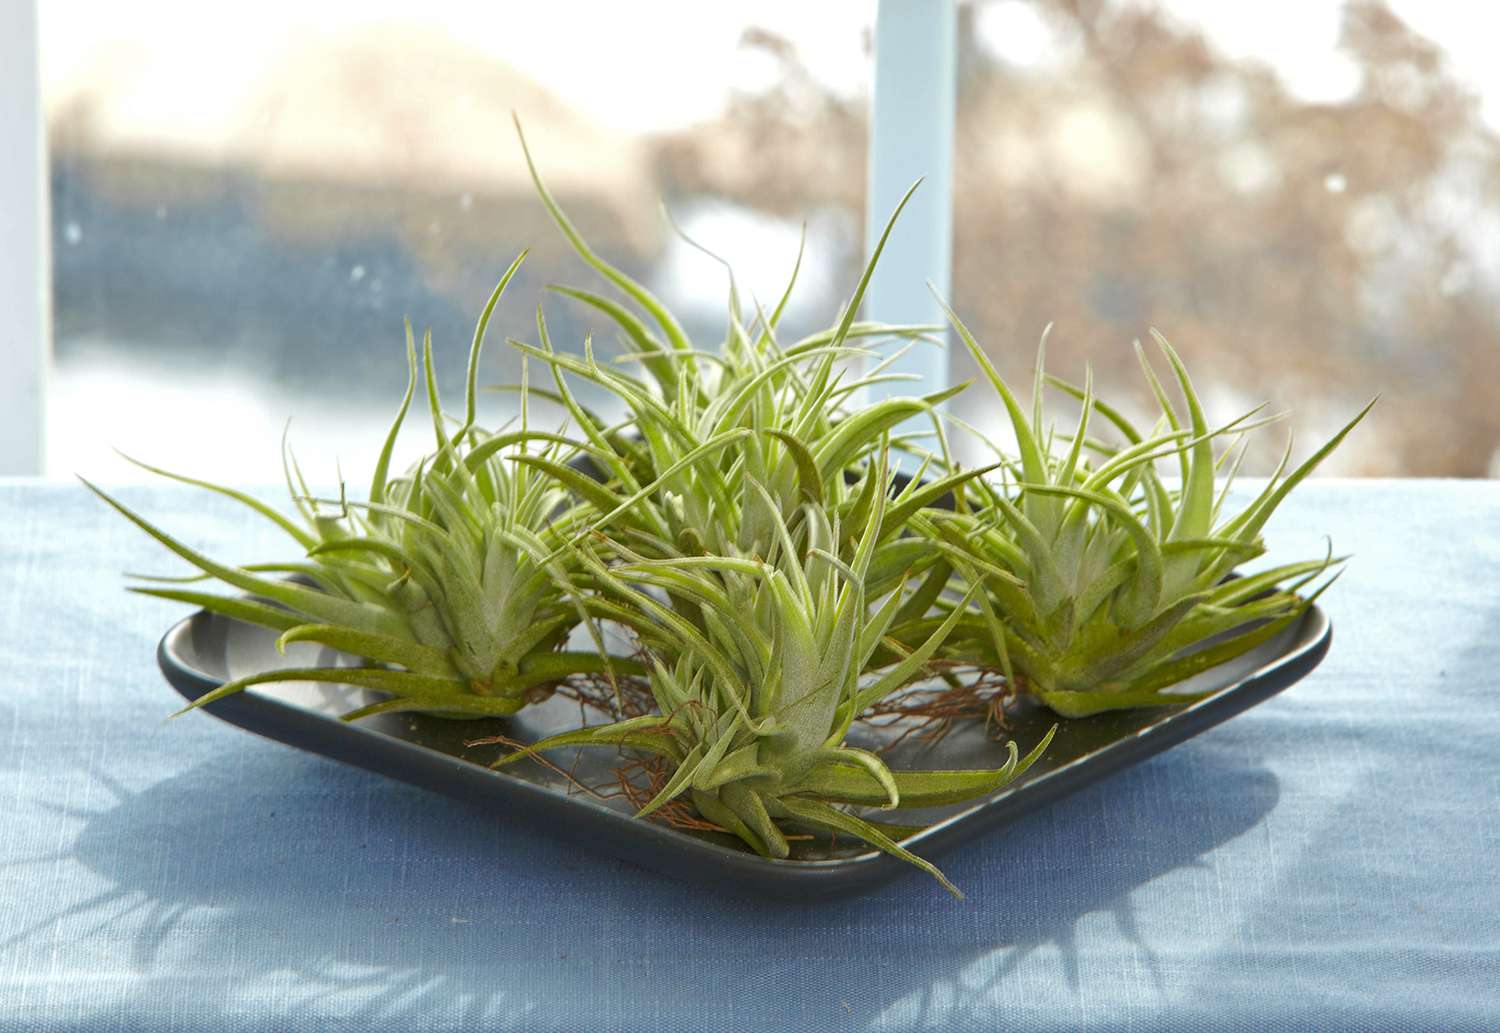 How to care for air plants on driftwood